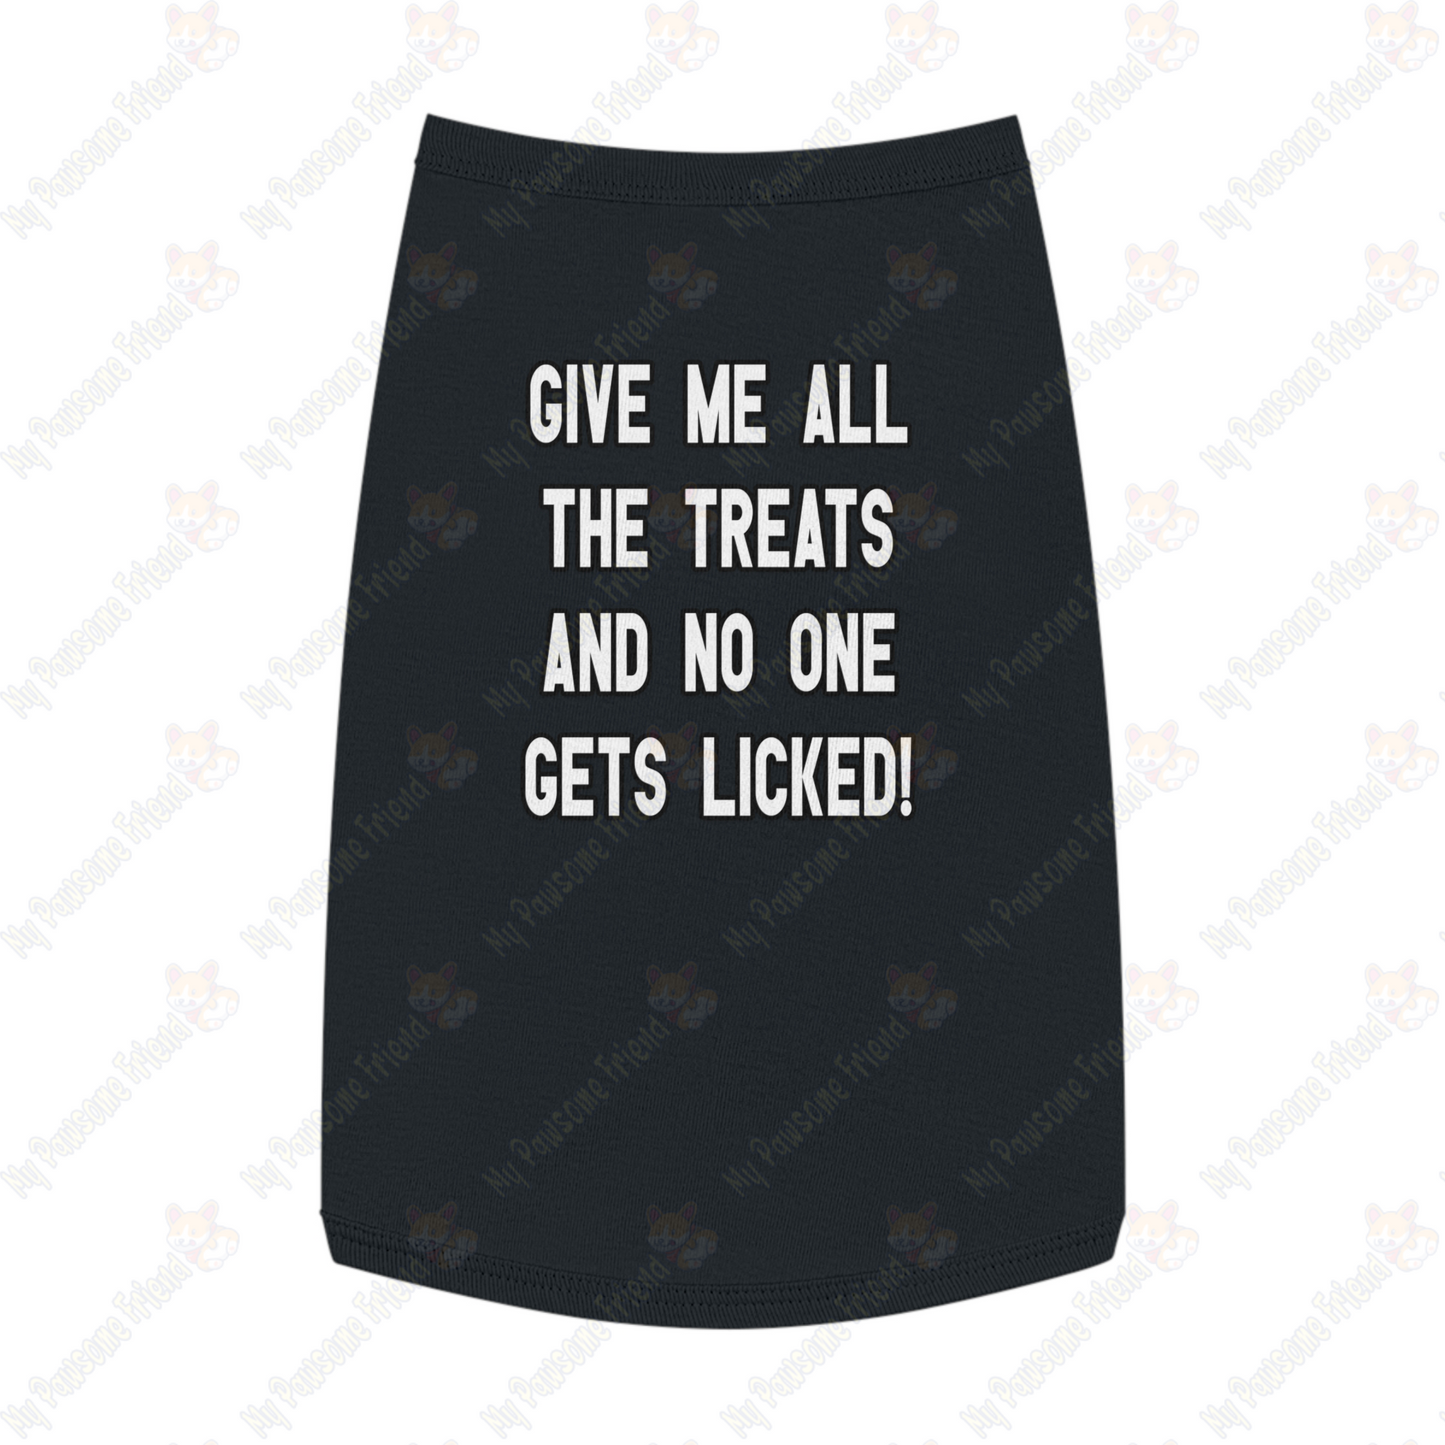 GIVE ME THE TREATS AND NO ONE GETS LICKED! Pet Tank Top black